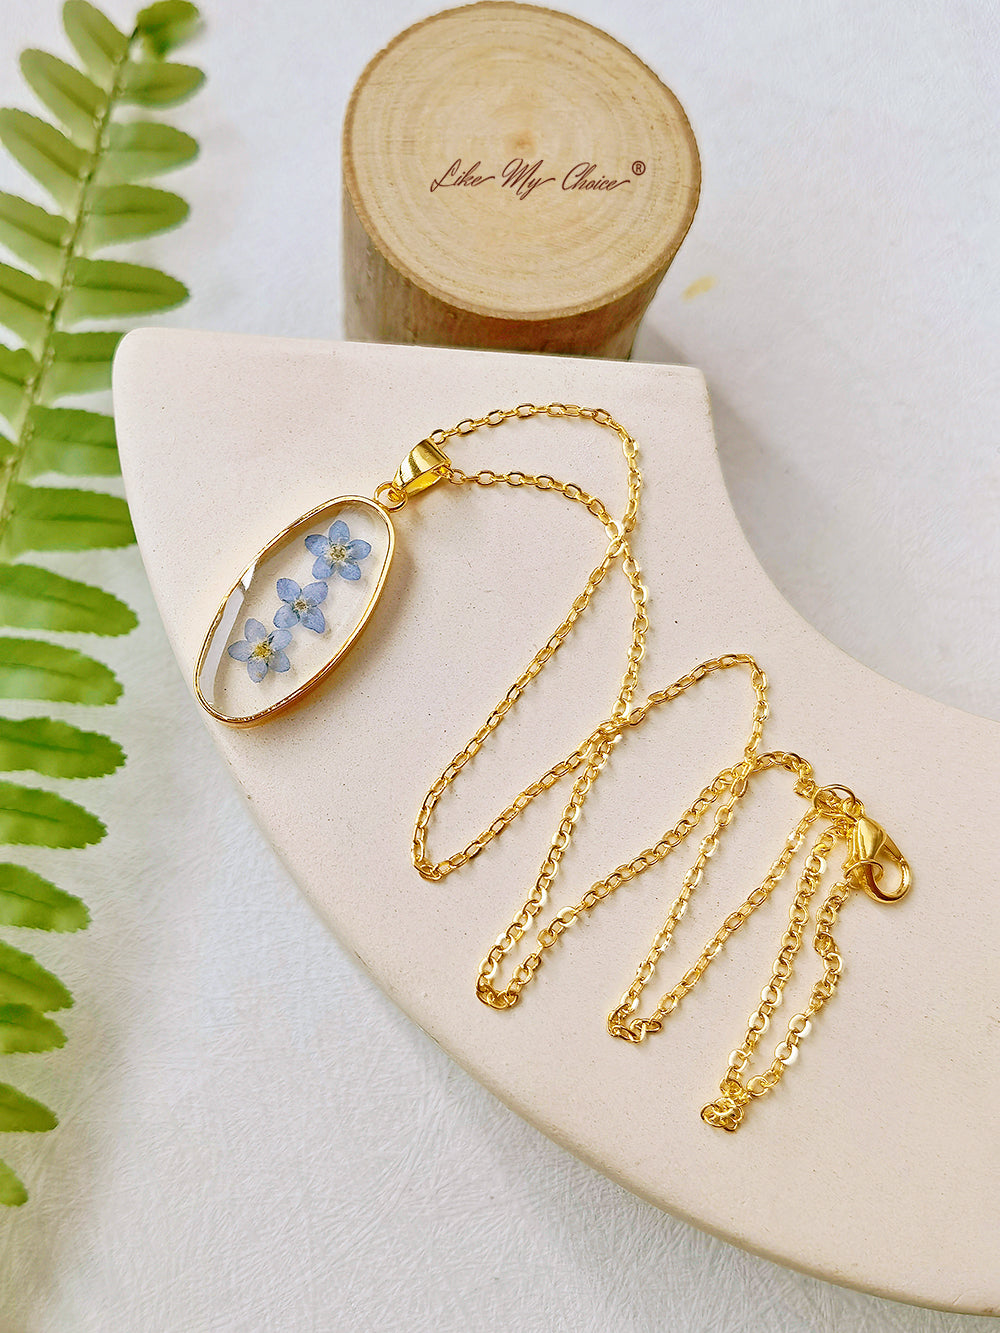 Forget Me Not Golden Oval Pendant Natural Resin Halsband